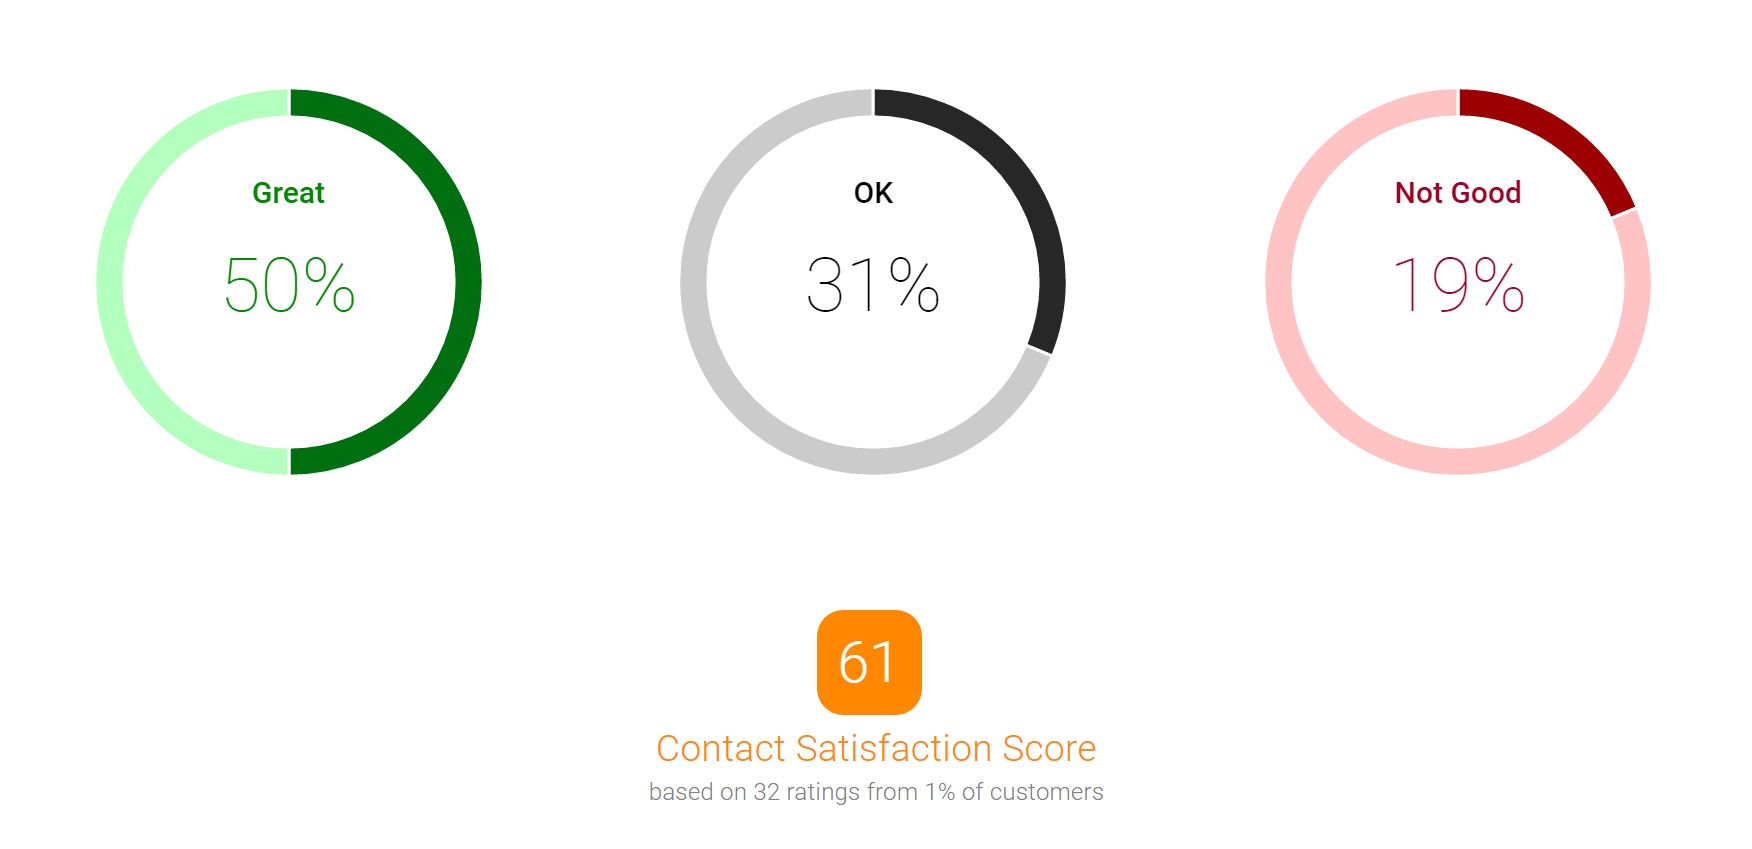 Group and target by satisfaction levels